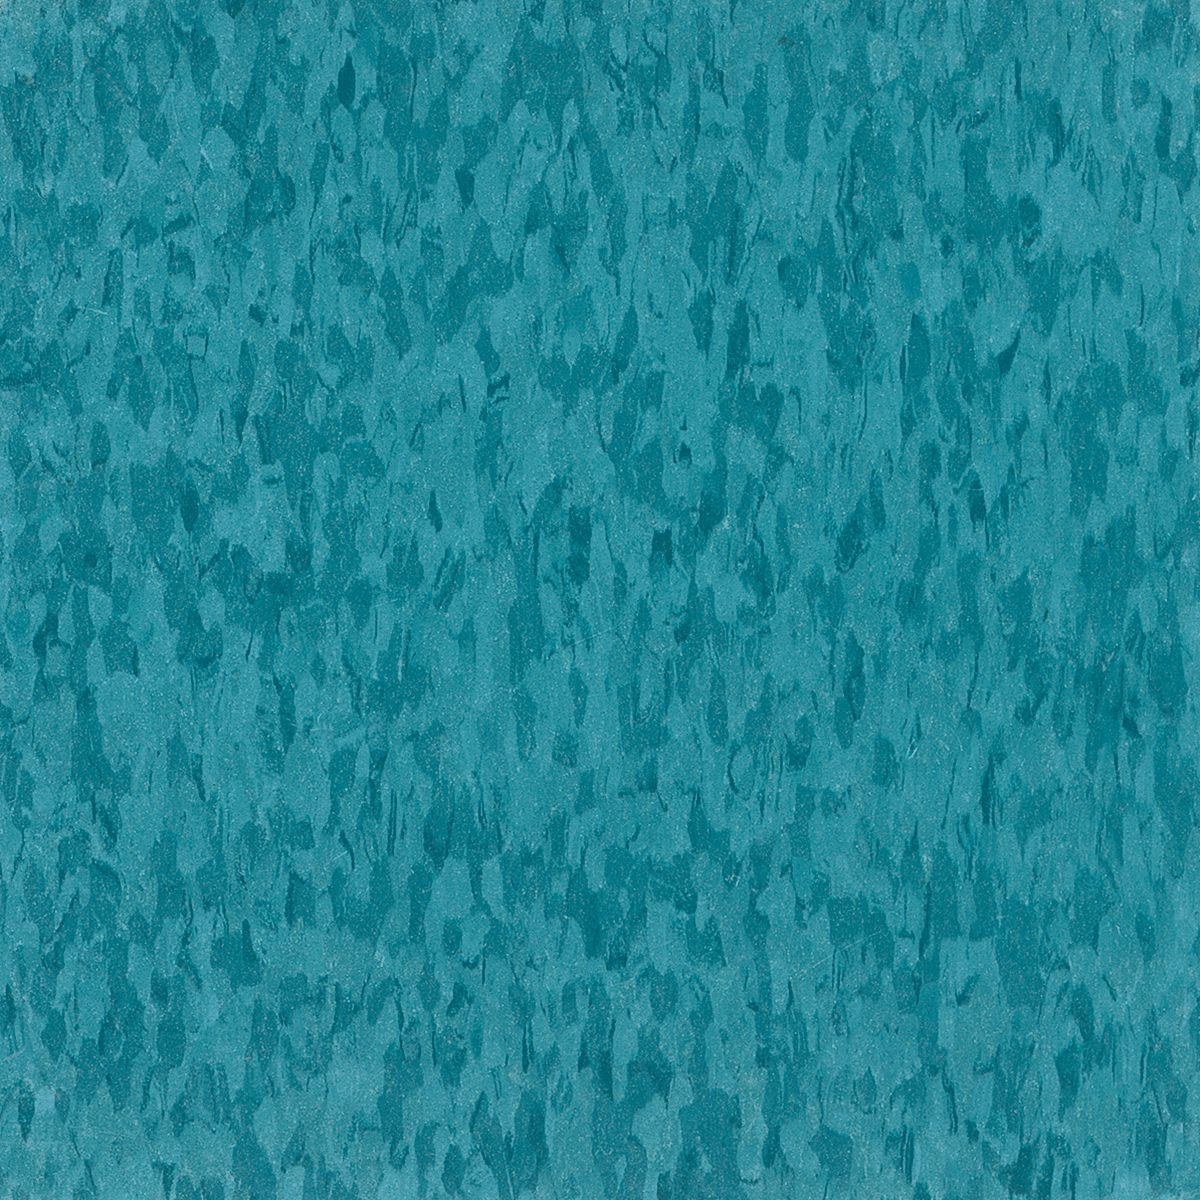 Standard Excelon Imperial Texture Bay Blue